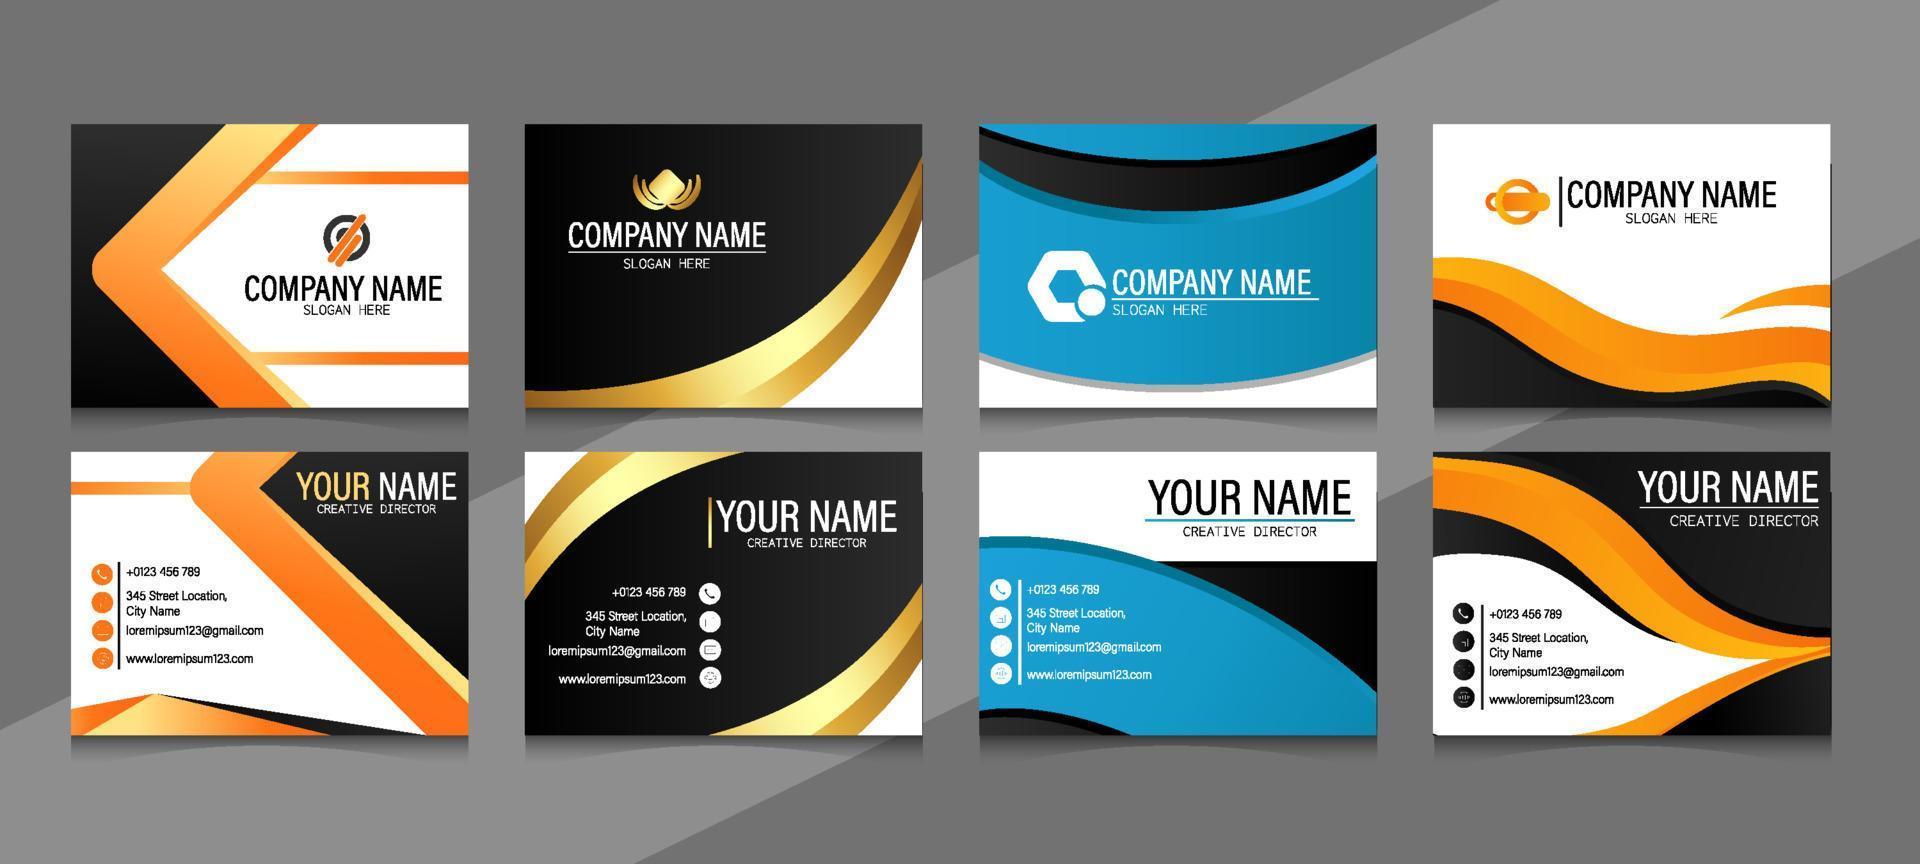 Name Card Business Set vector